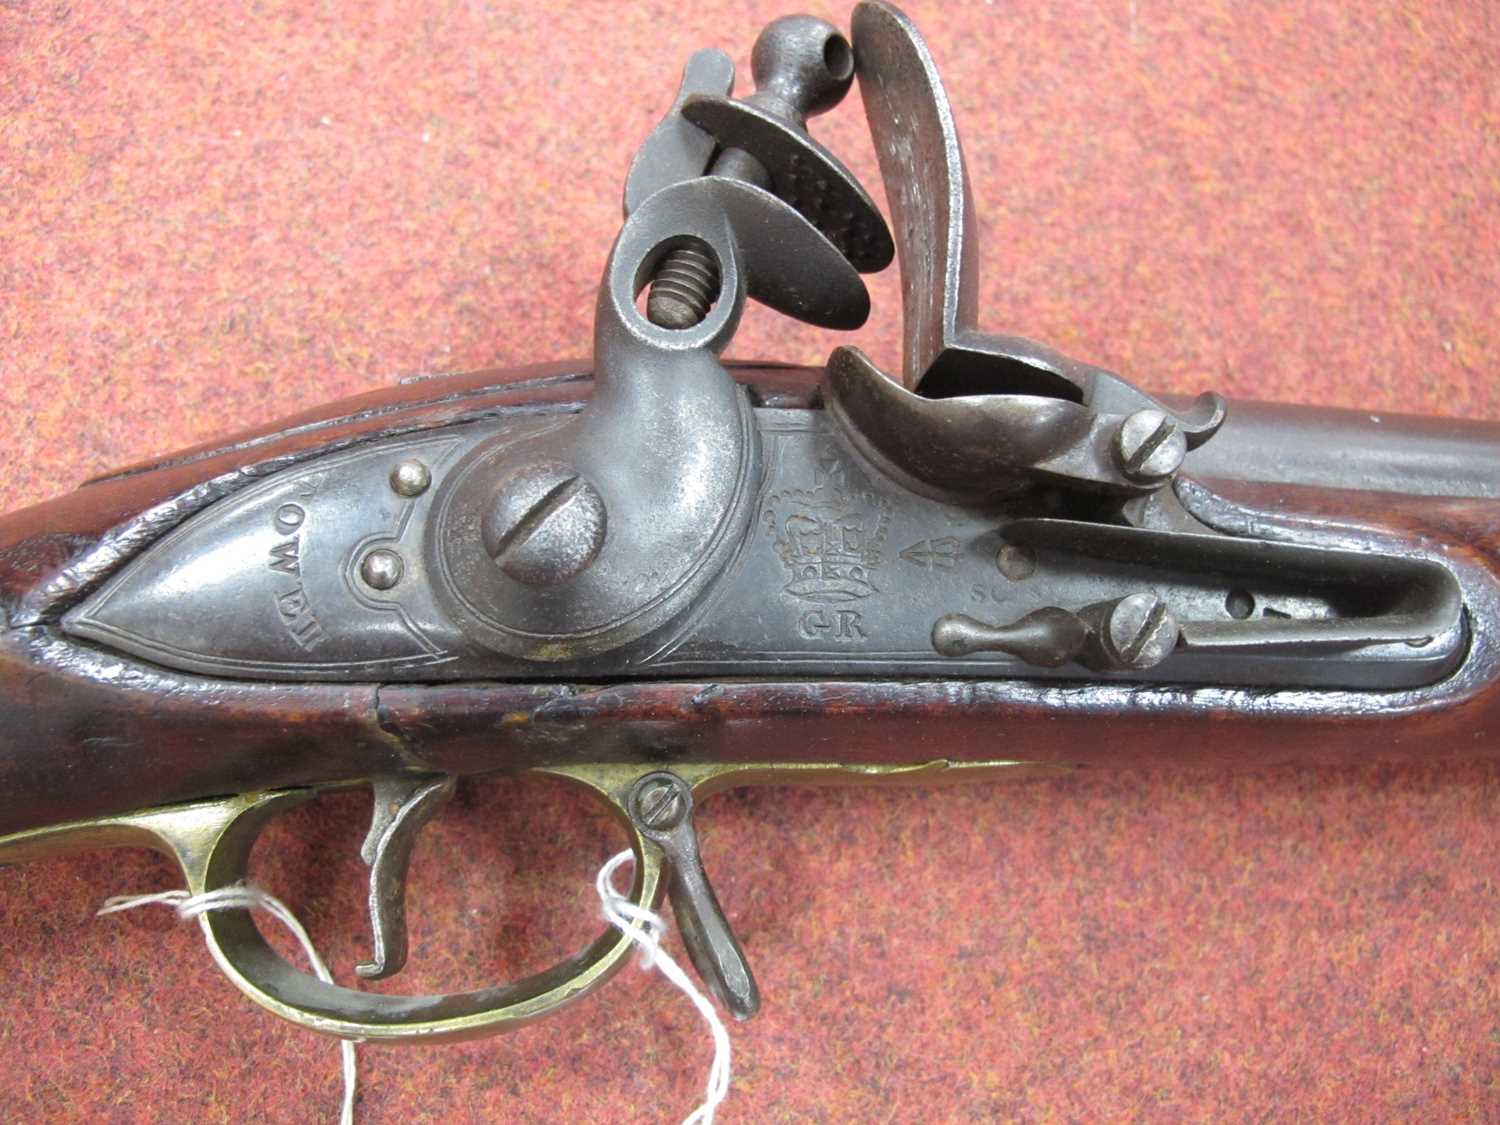 British India Pattern Circa 1810 'Brown Bess' Flintlock Musket, marked 'Tower' with 'GR' crown - Image 16 of 17